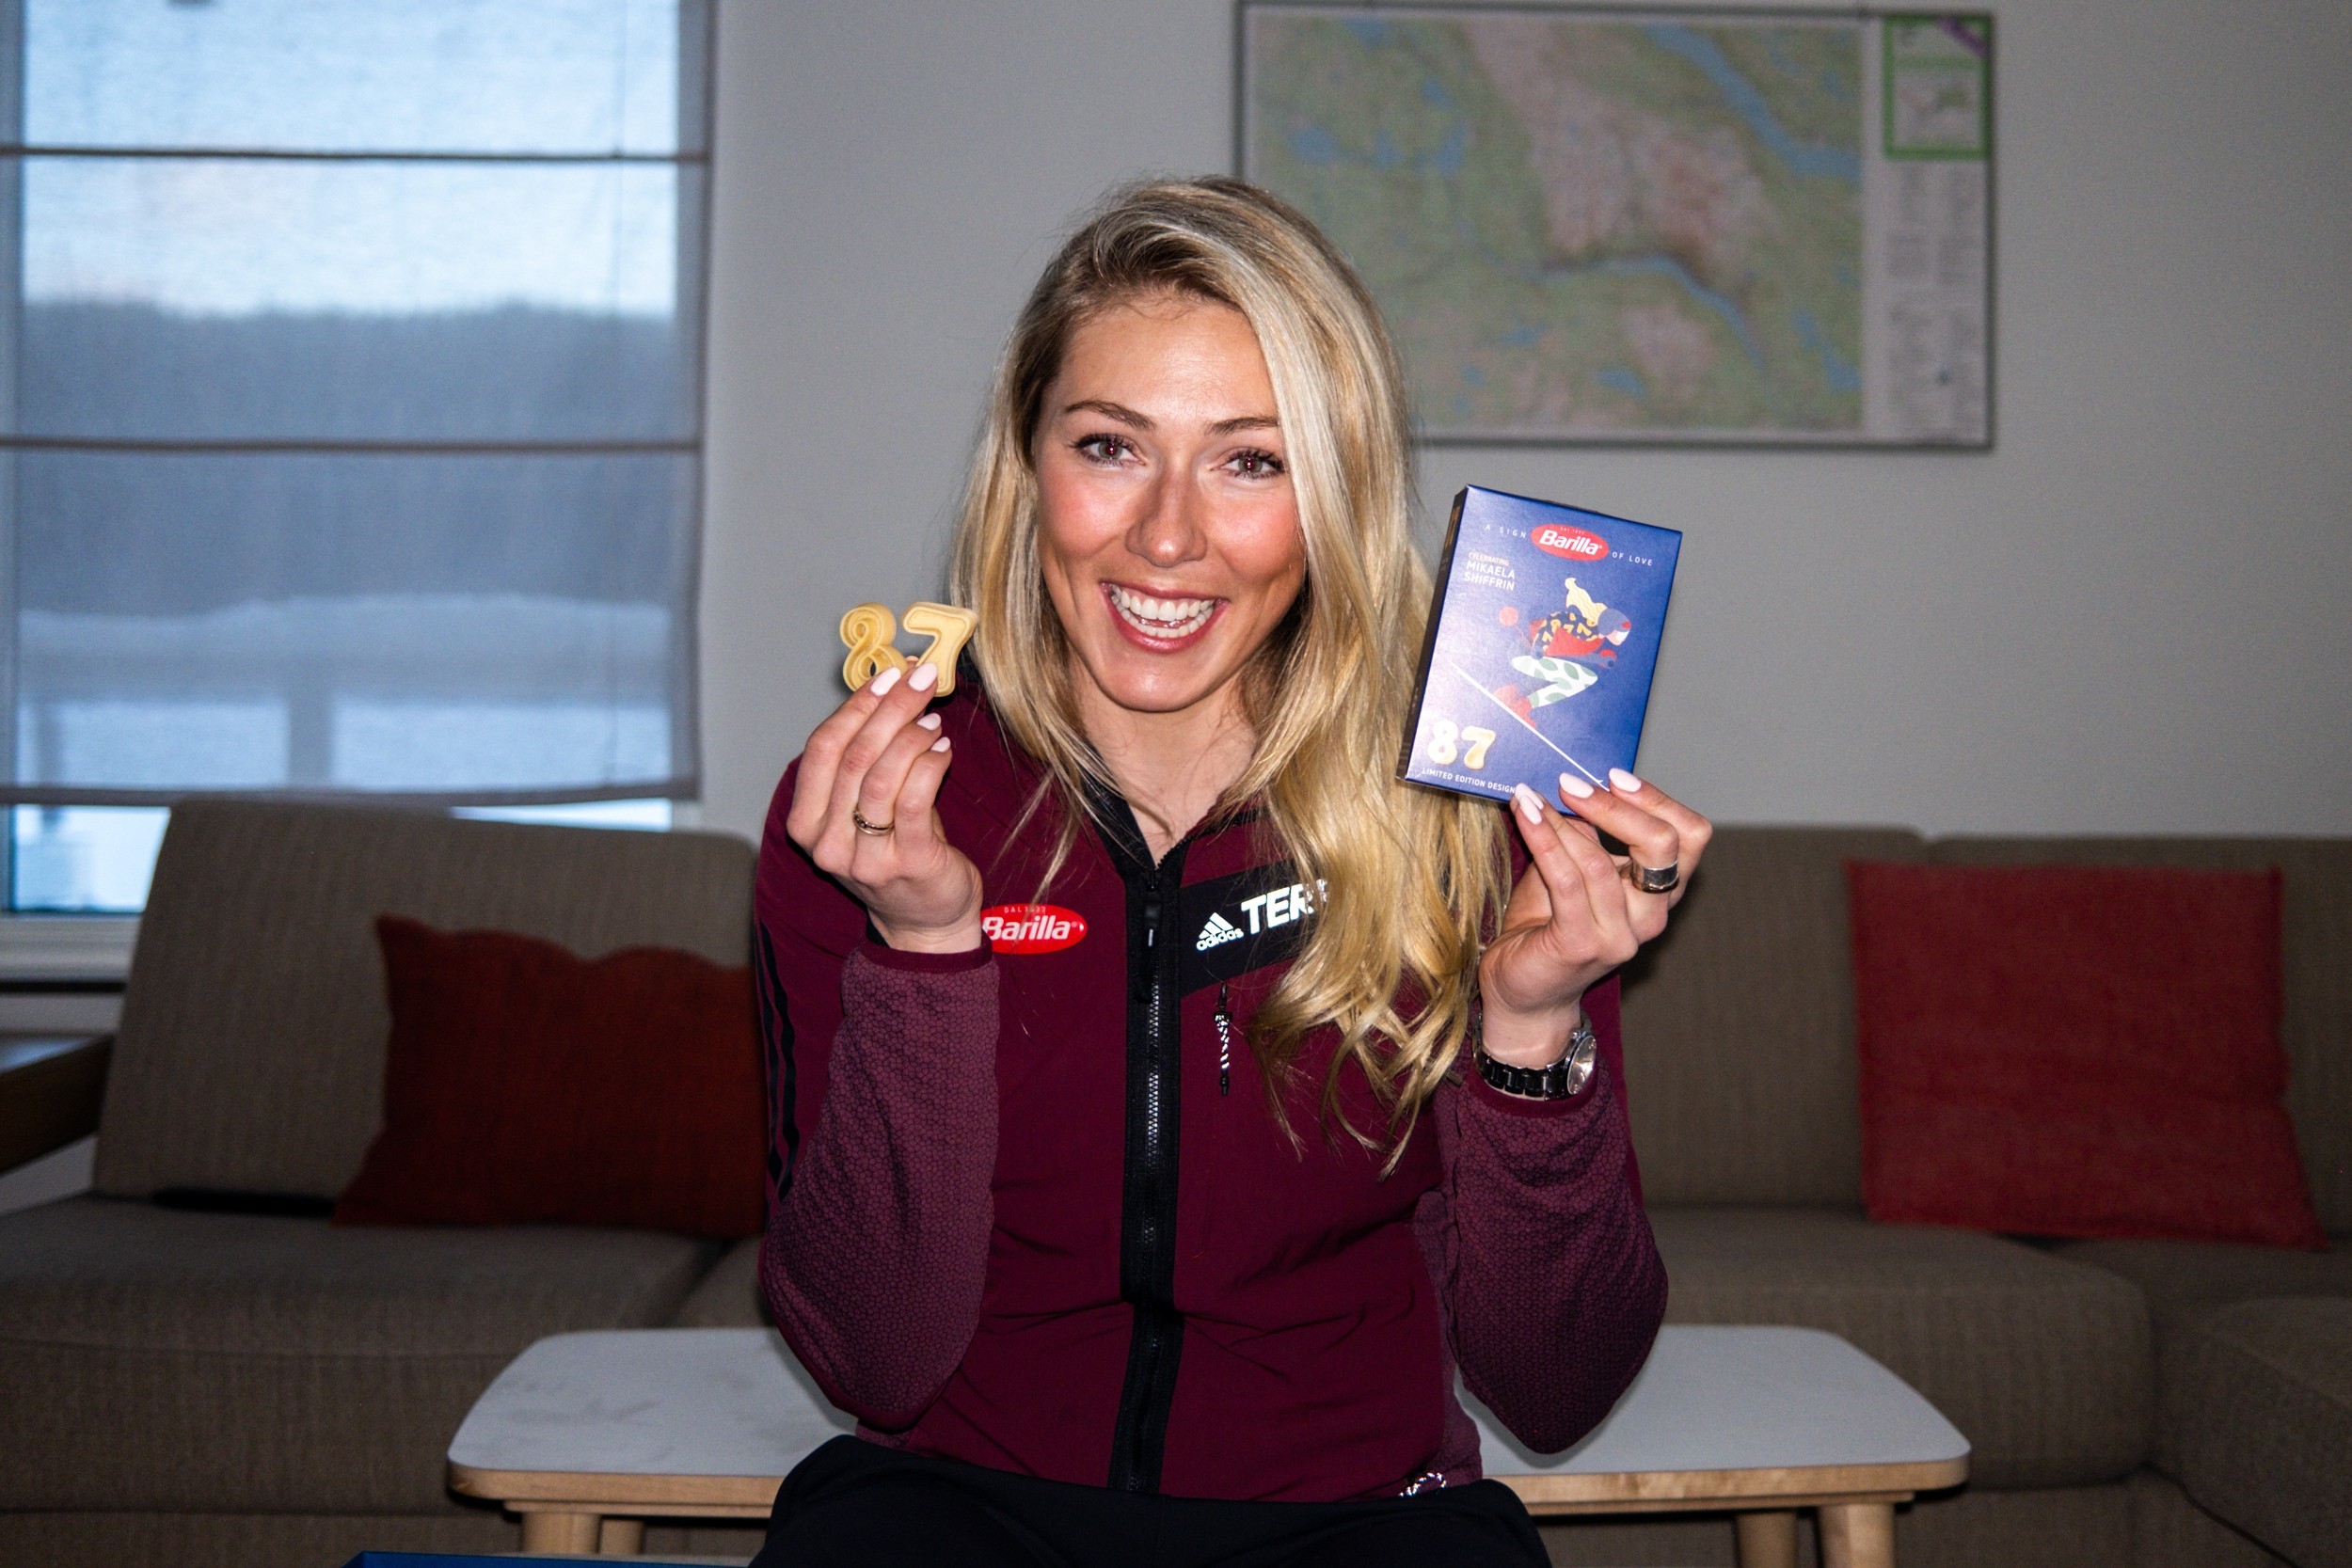 Barilla & Mikaela Shiffrin: Greatness starts with a great recipe - Pack No. 28